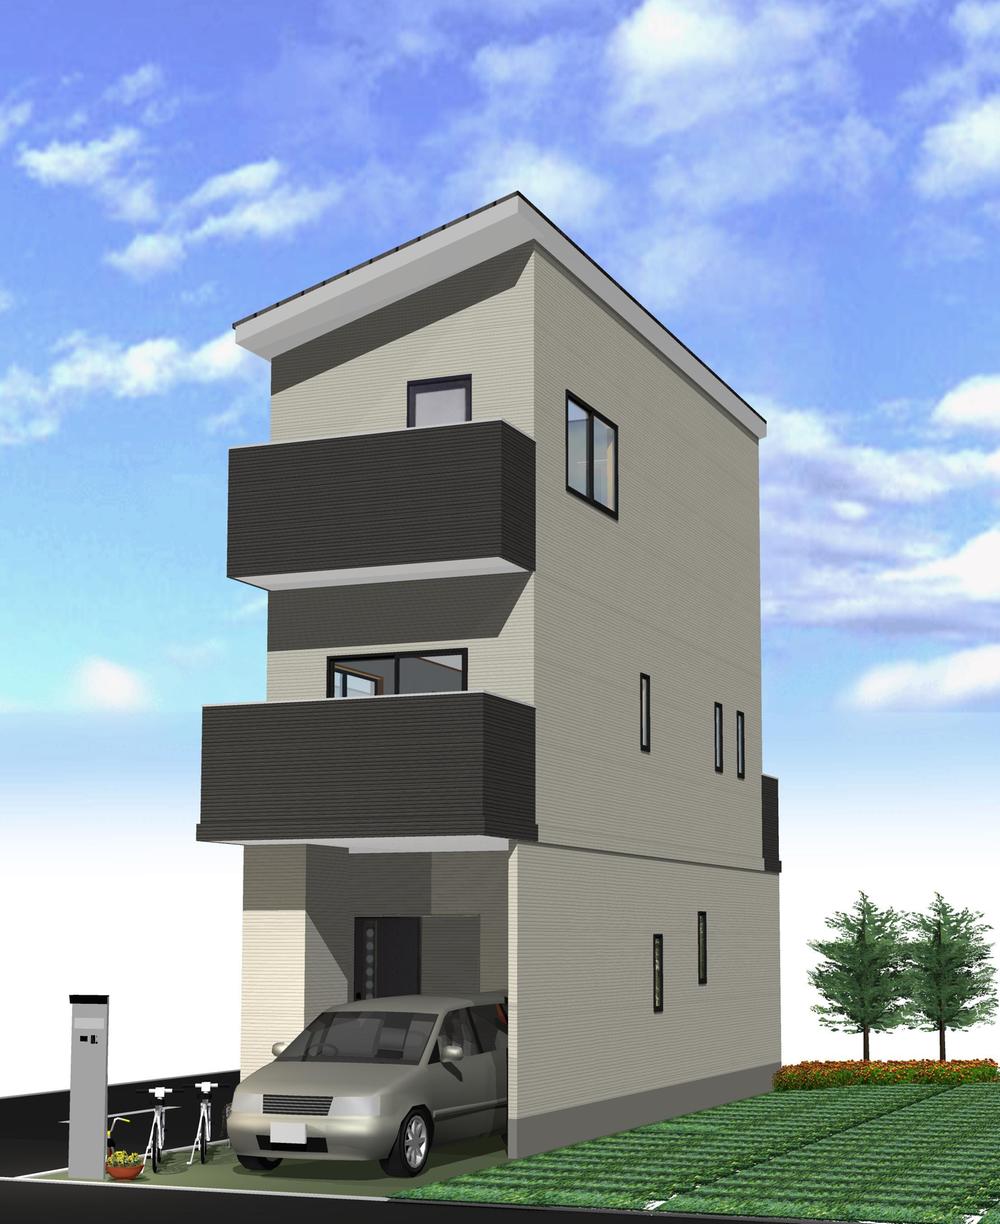 Building plan example (Perth ・ appearance). Building plan example Building area: 78.56 sq m (Image Perth)